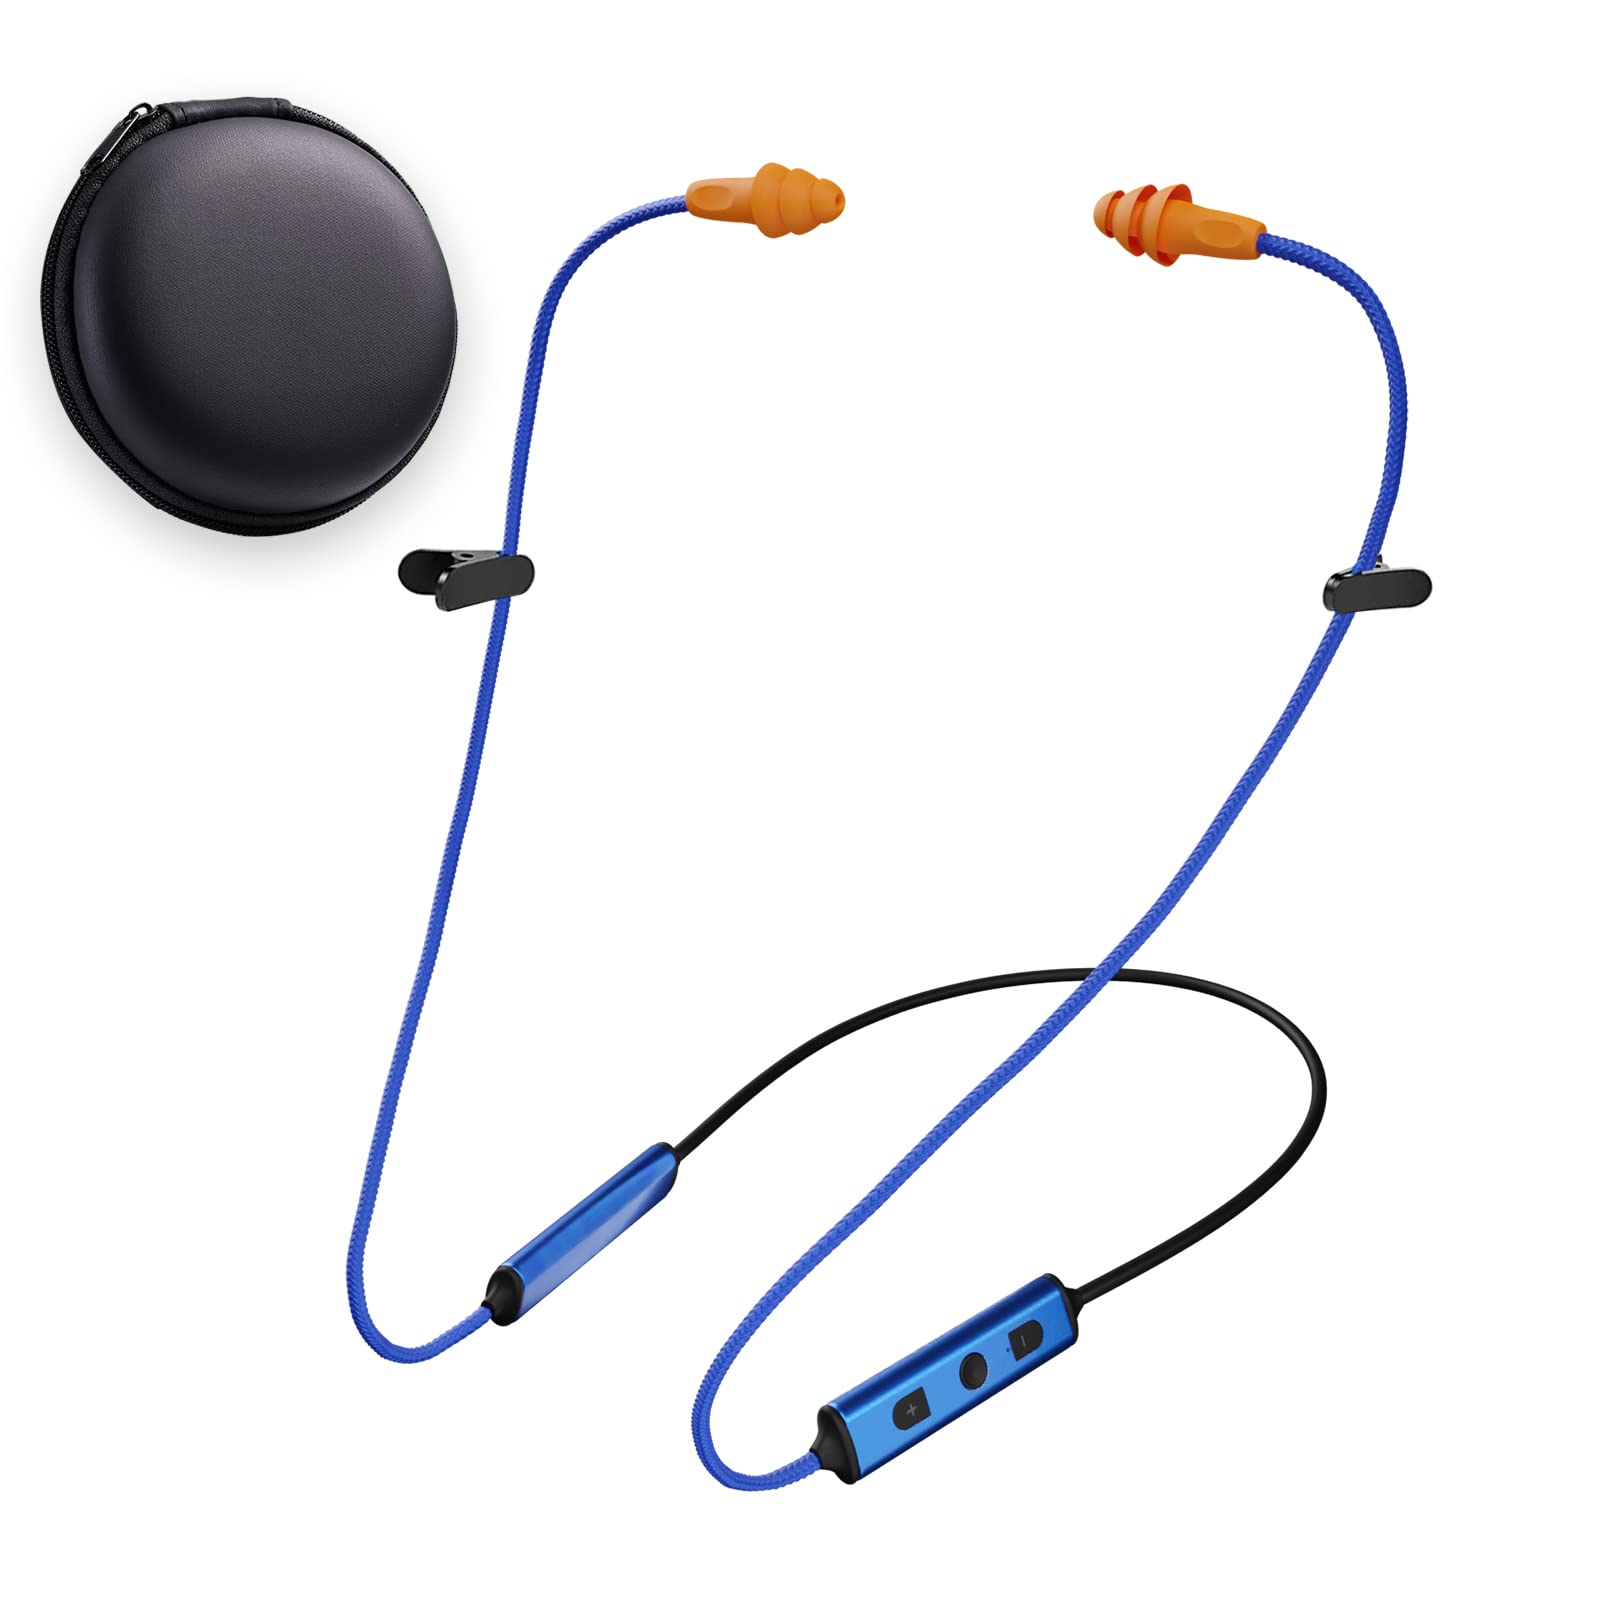 Construction work earbuds